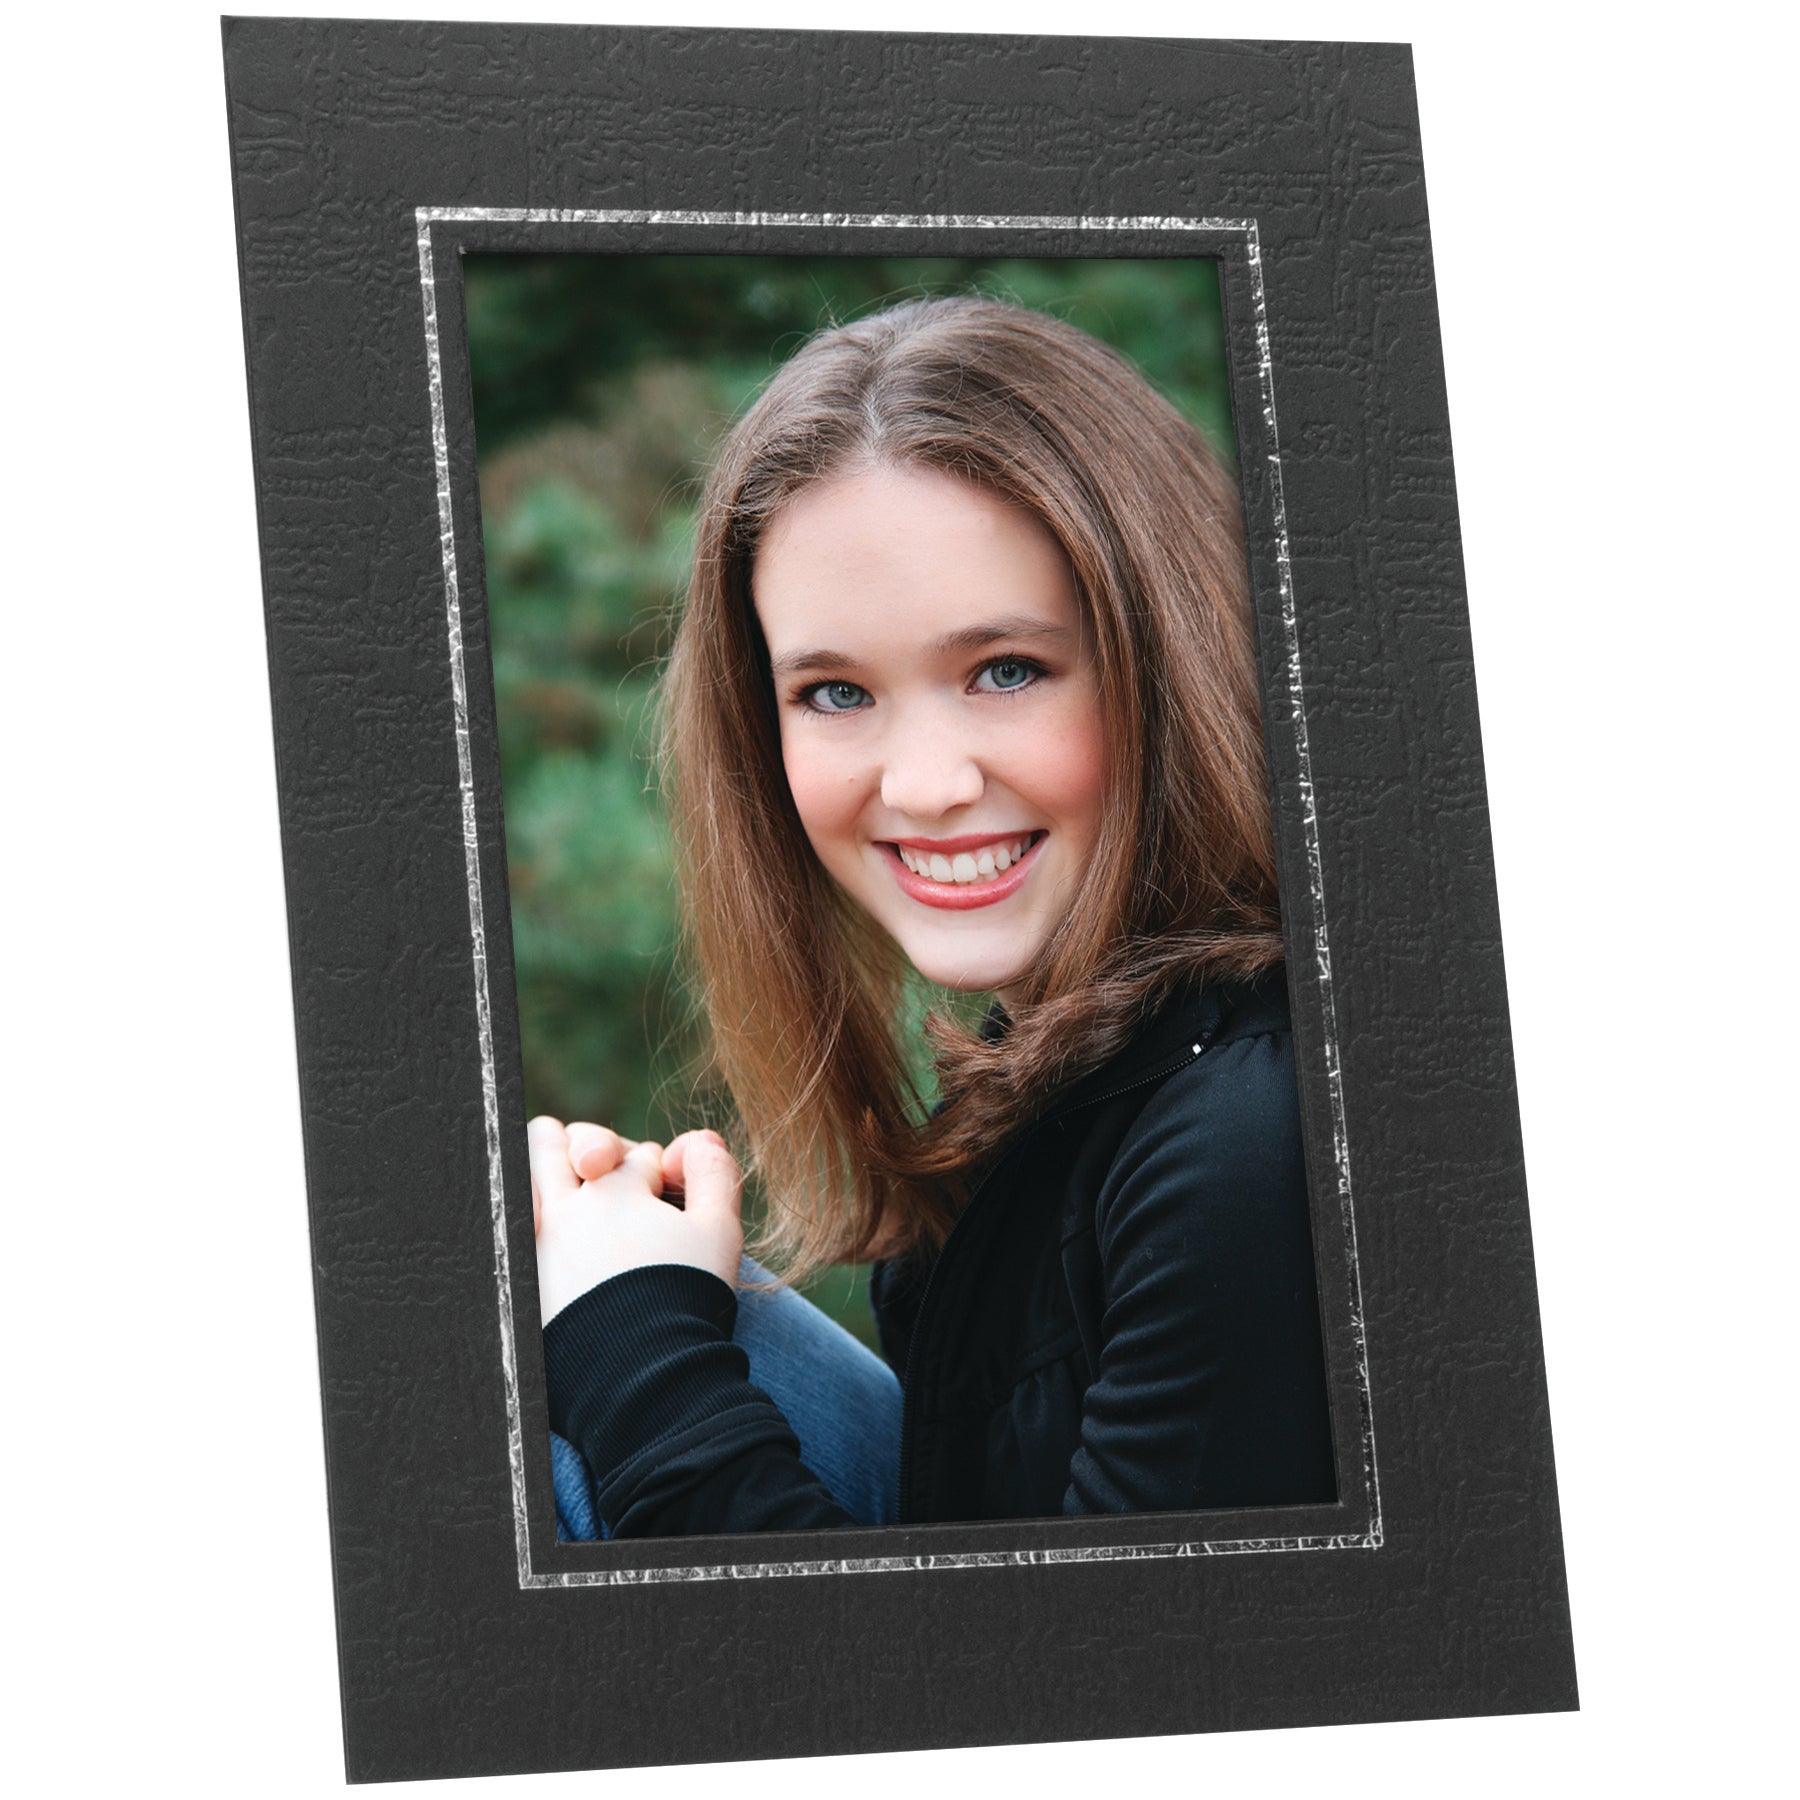 50 Pack Black Paper Picture Frames 4x6, Cardboard Photo Easels For